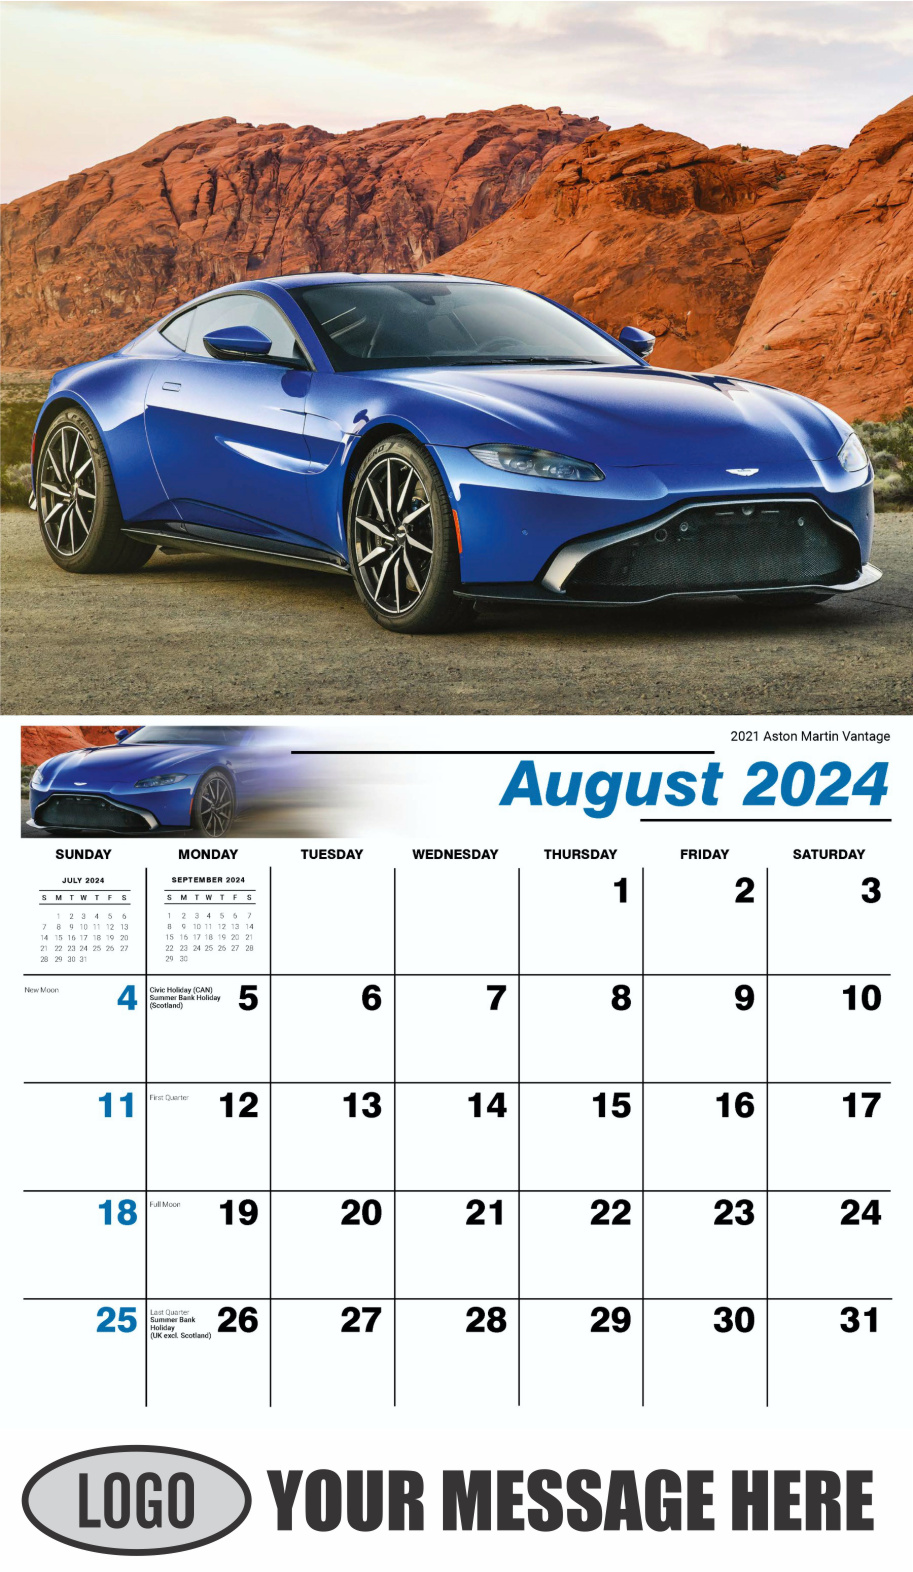 Exotic Cars 2024 Automotive Business Advertising Calendar - August